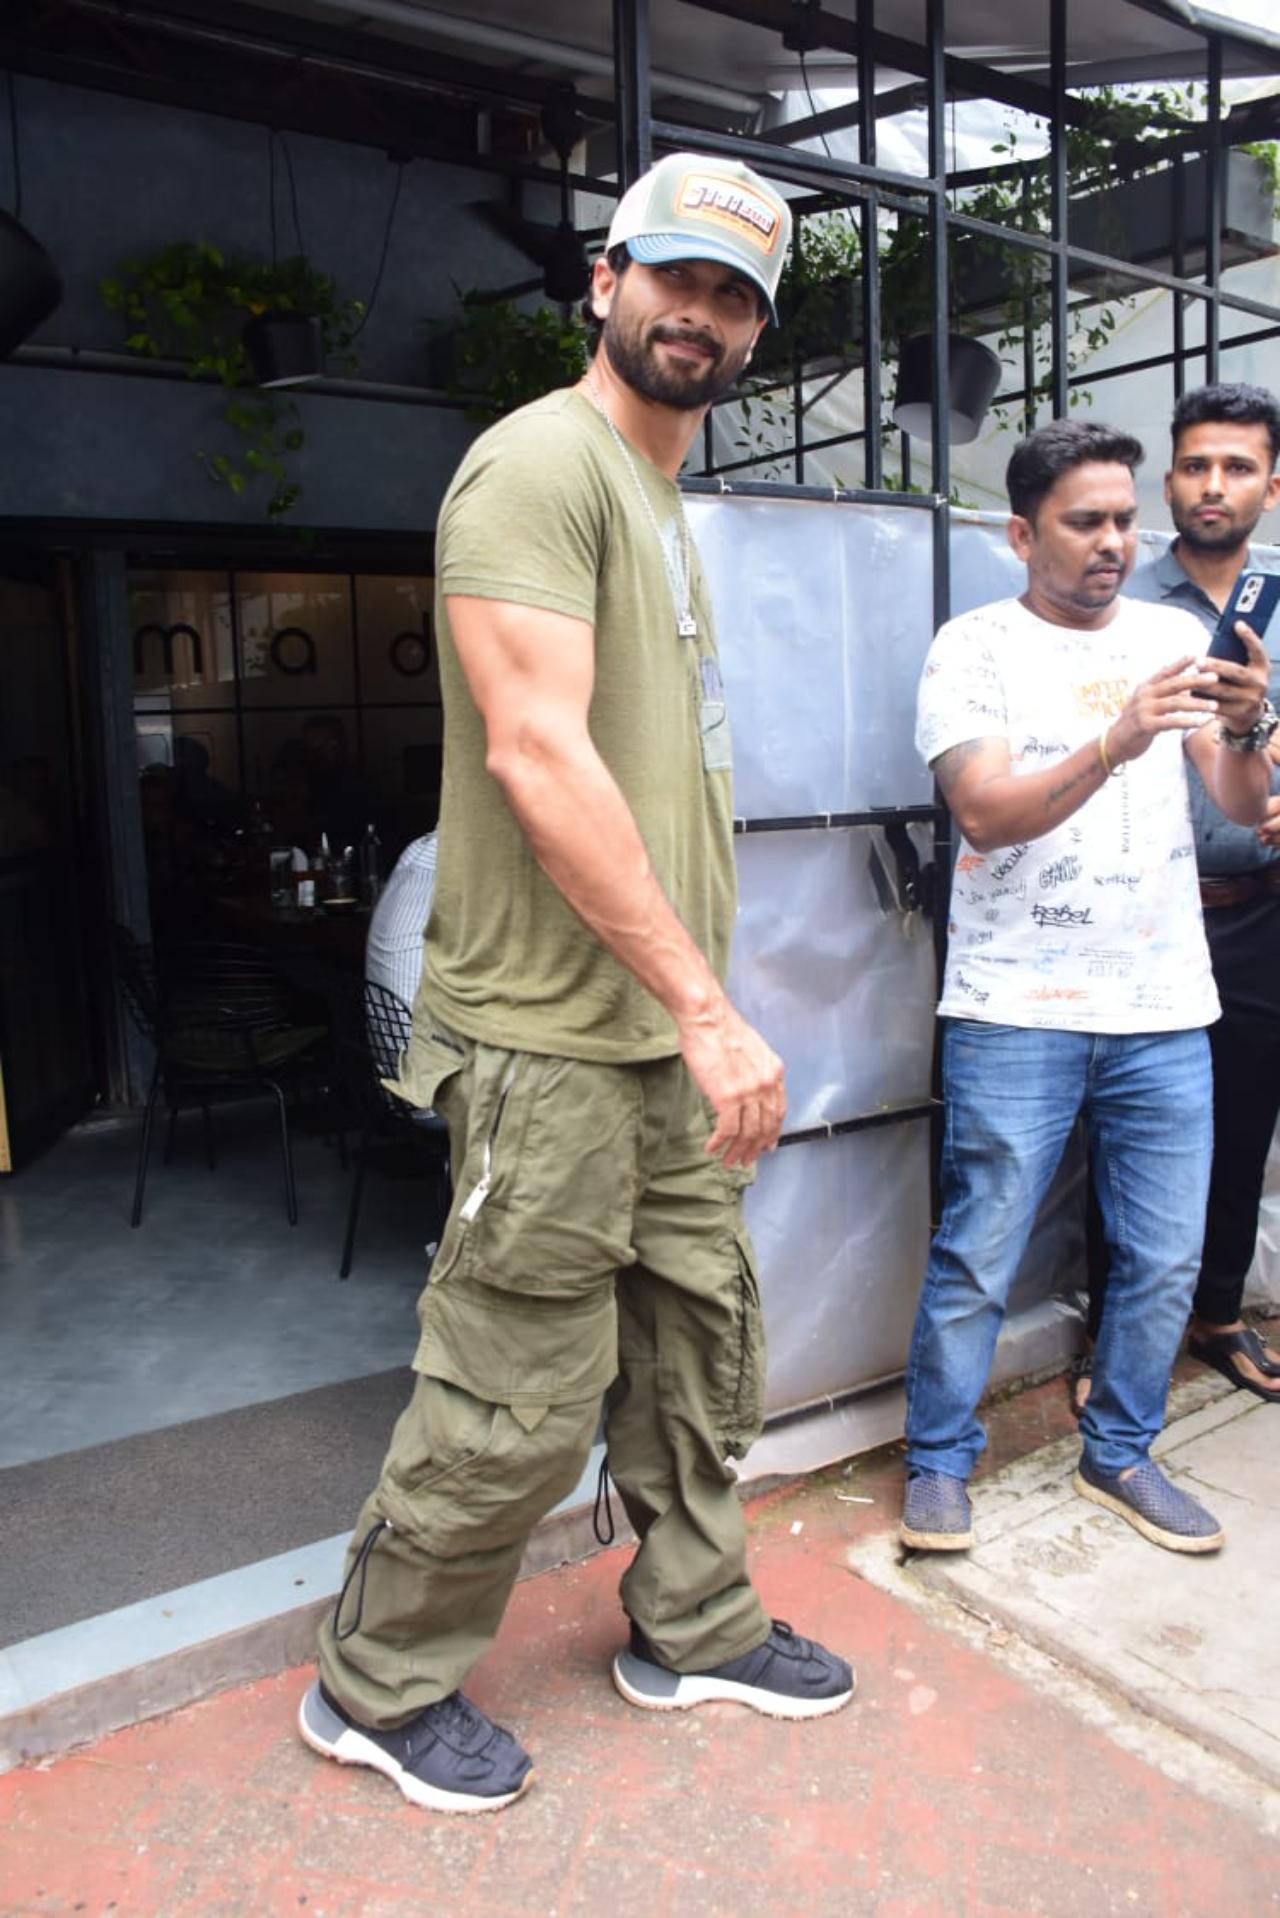 Hayee, we're melting at that smile! Shahid Kapoor looks ever the charming hero in his camouflage army-style olive green t-shirt and baggy pants